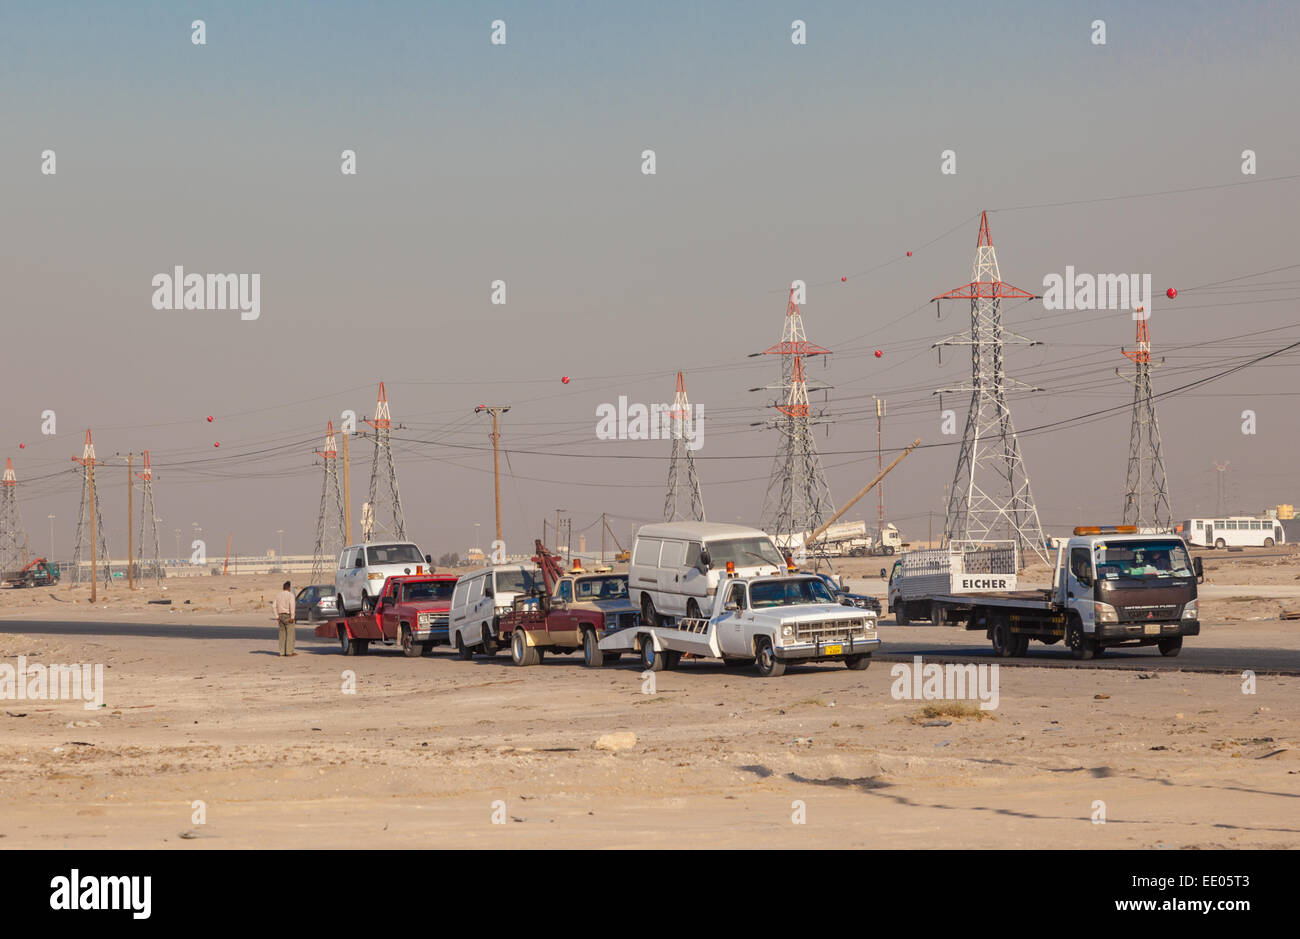 Old american GMC wrecking trucks still in use in Kuwait. December 9, 2014 in Kuwait, Middle East Stock Photo